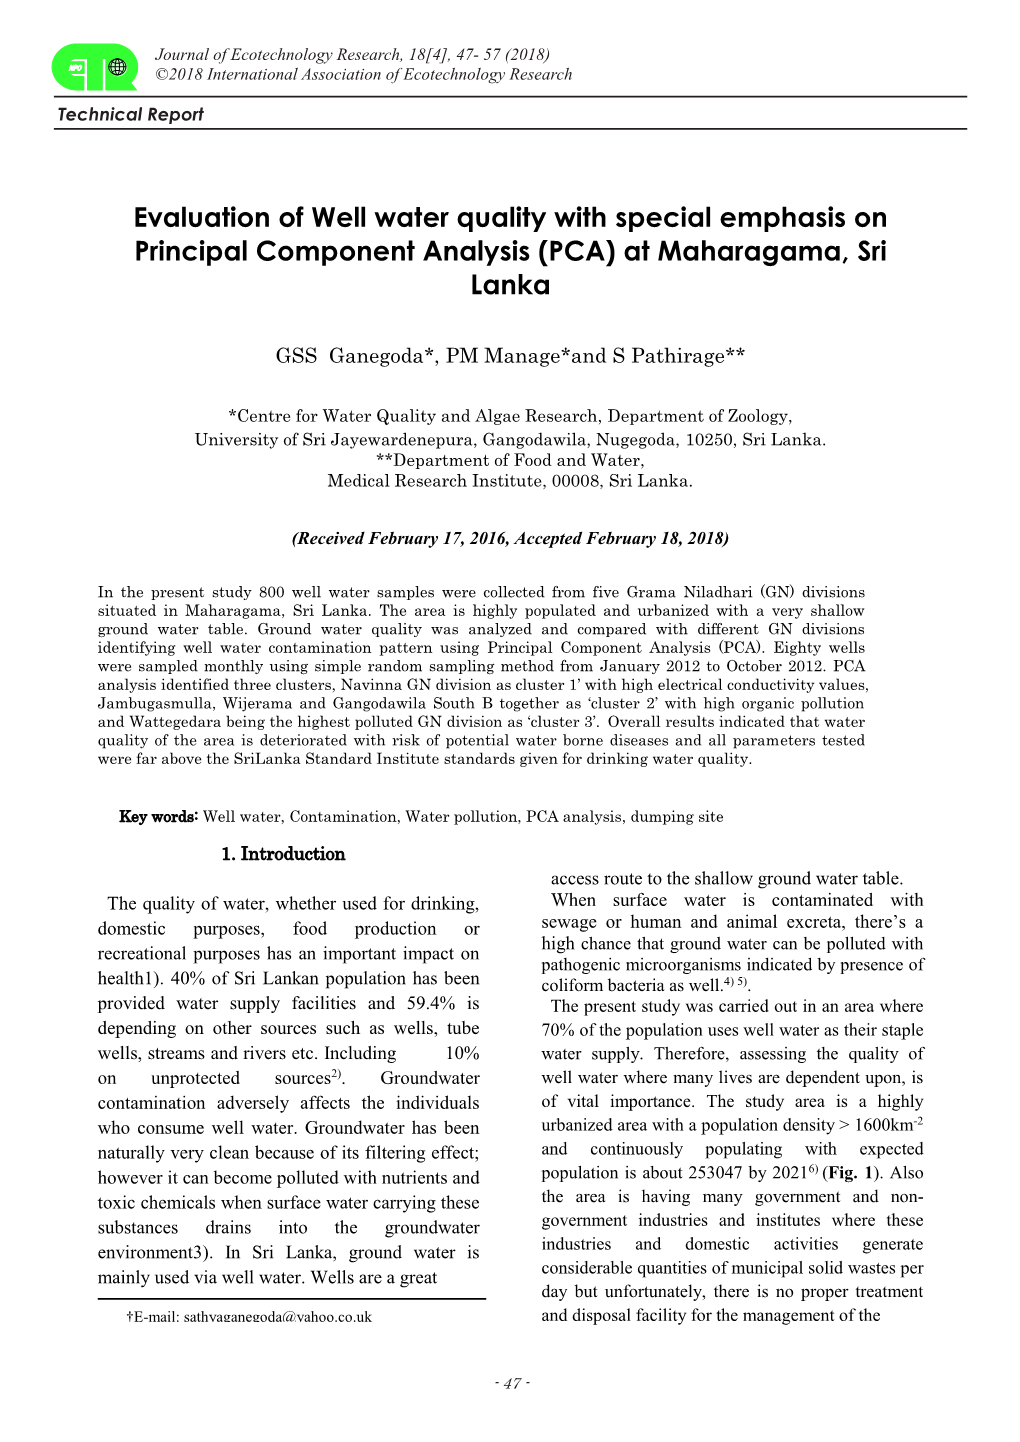 Evaluation of Well Water Quality with Special Emphasis on Principal Component Analysis (PCA) at Maharagama, Sri Lanka